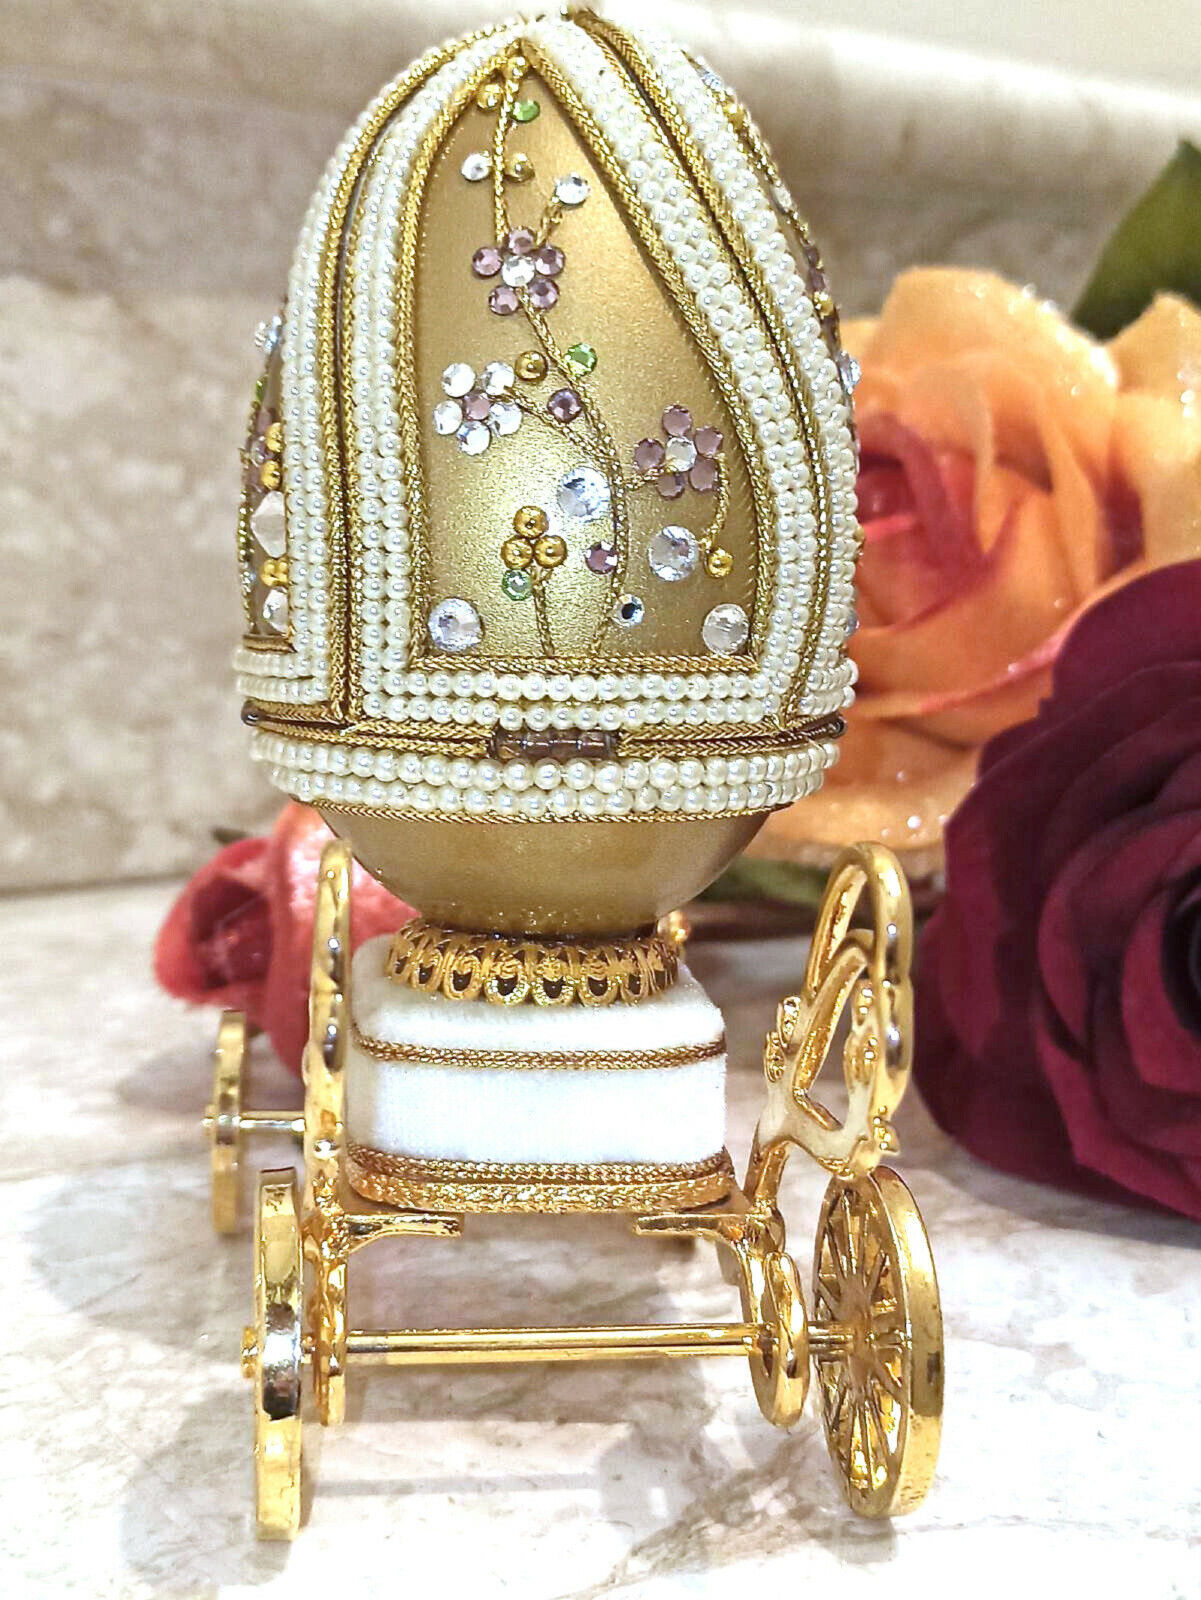 Exquisite Christmas gift for wife Fabergé Faberge egg musical 10ct 24k GOLD Hmde